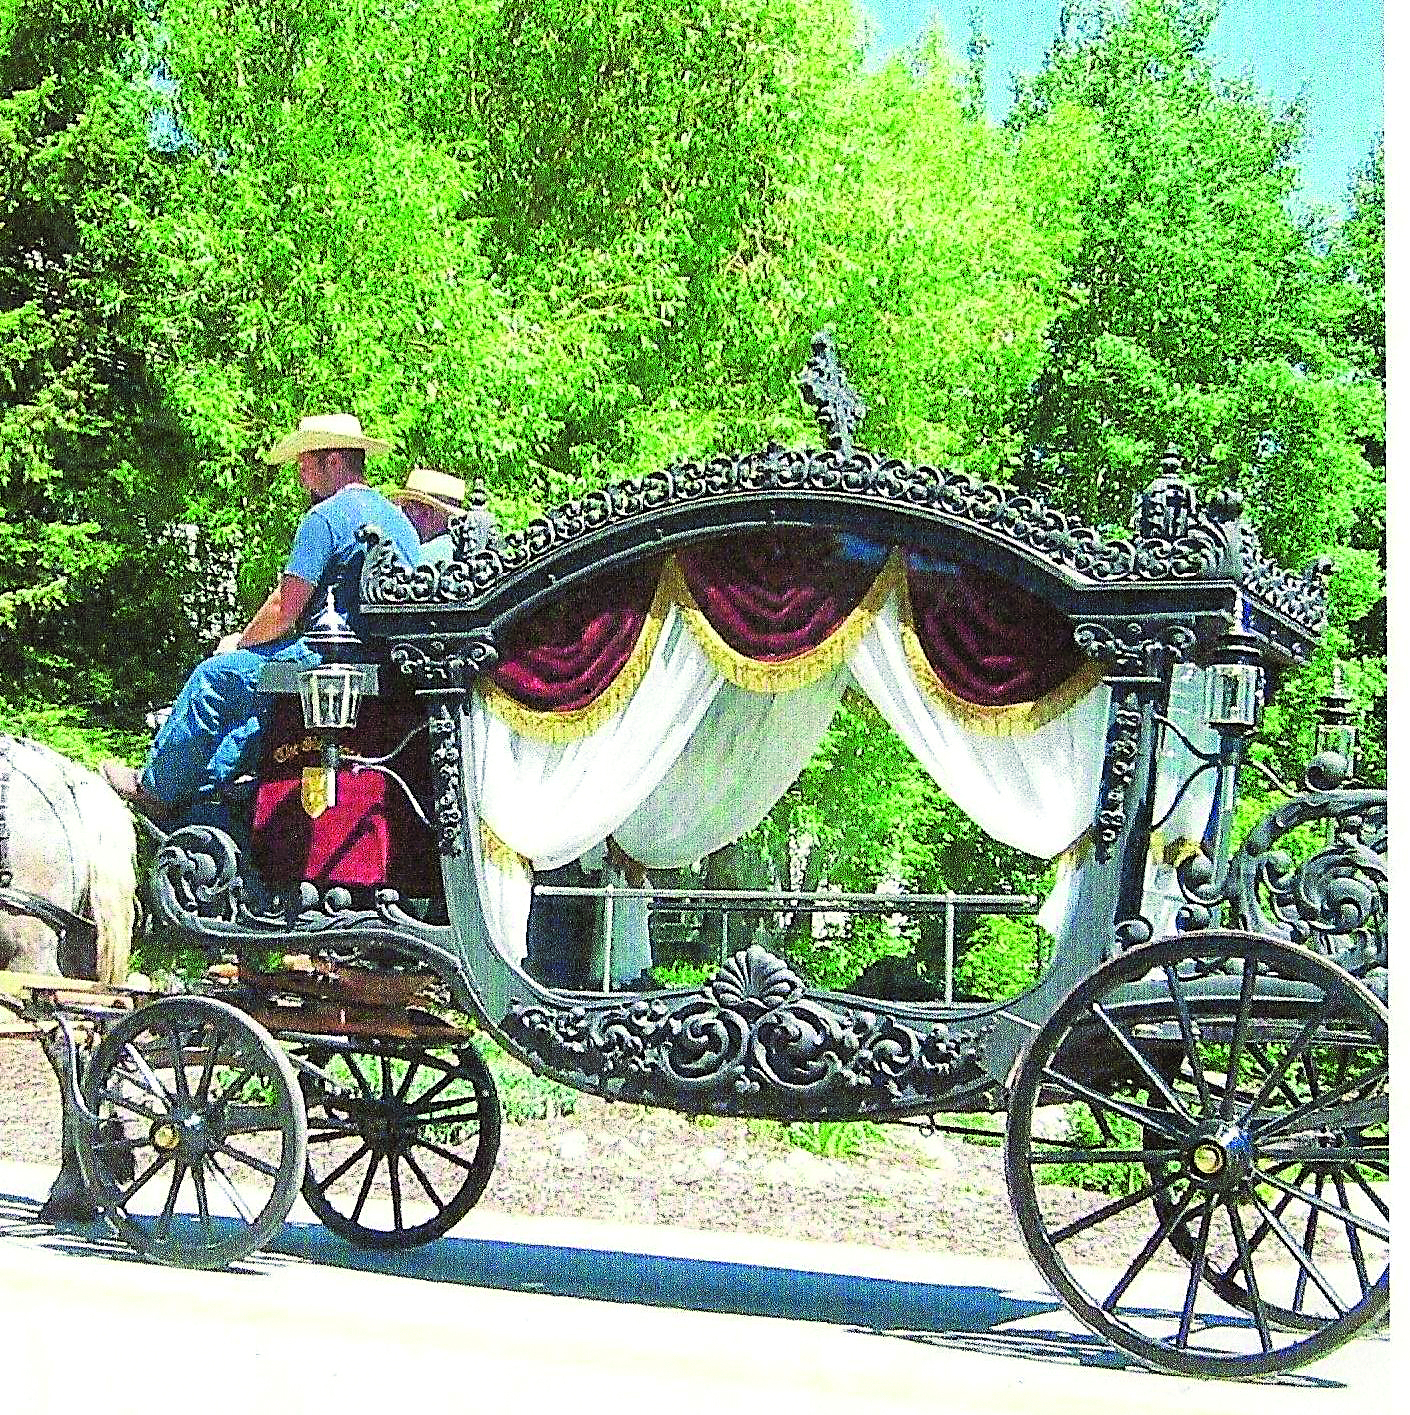 One item offered at the Tides of March auction is the opportunity to have this 1905 Viennese carriage hearse